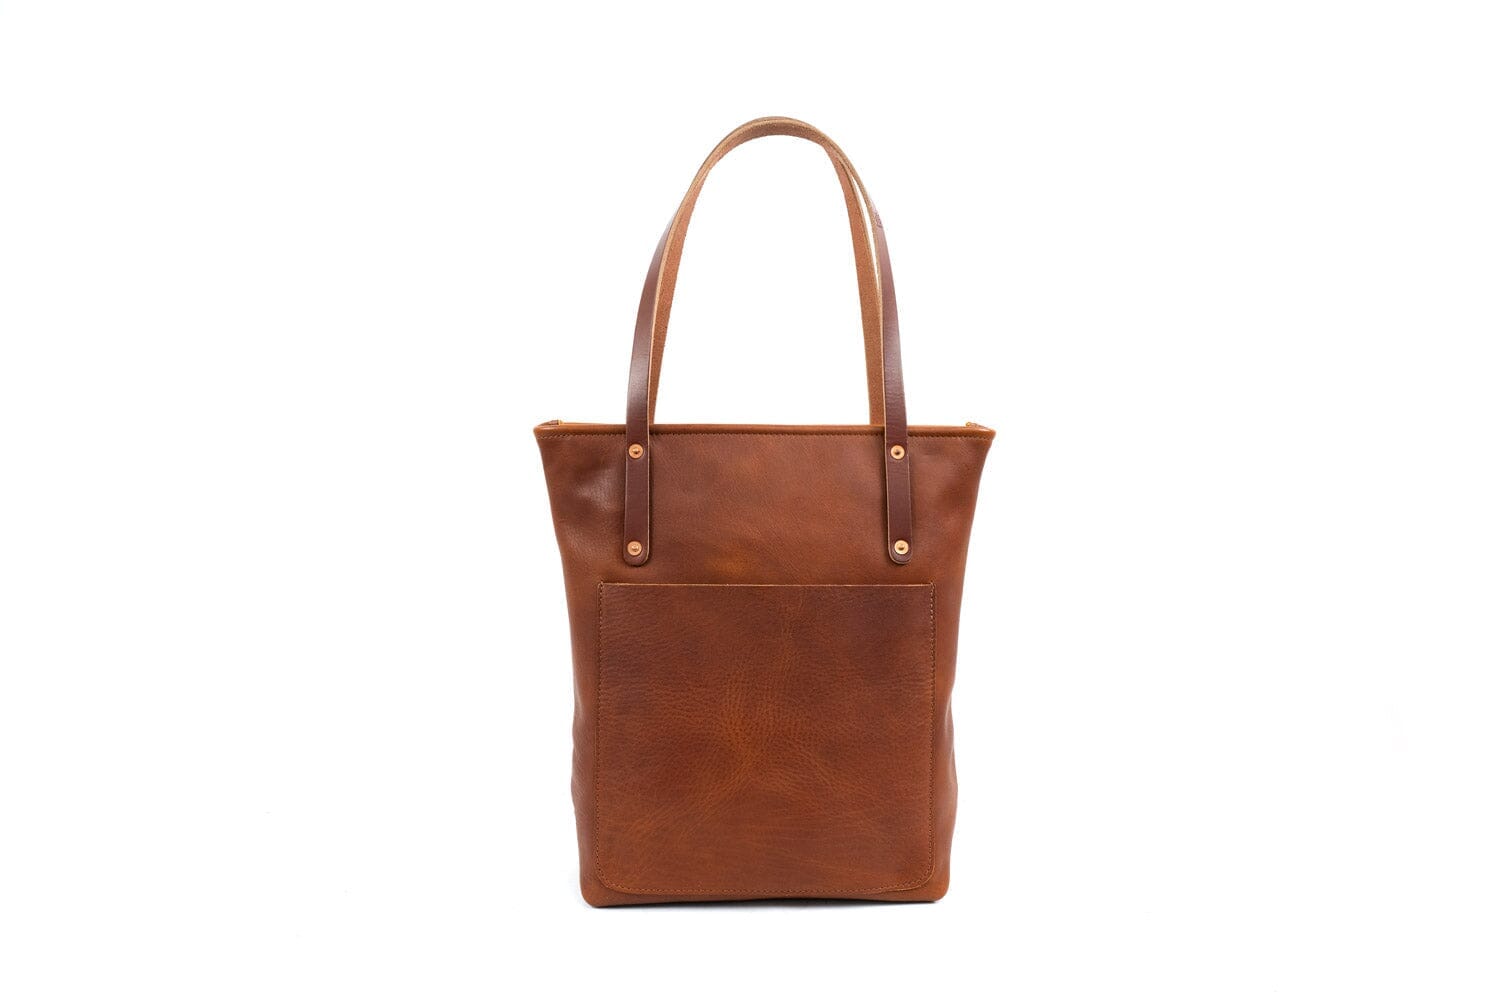 AVERY LEATHER TOTE BAG WITH ZIPPER - SLIM LARGE DELUXE (READY TO SHIP)